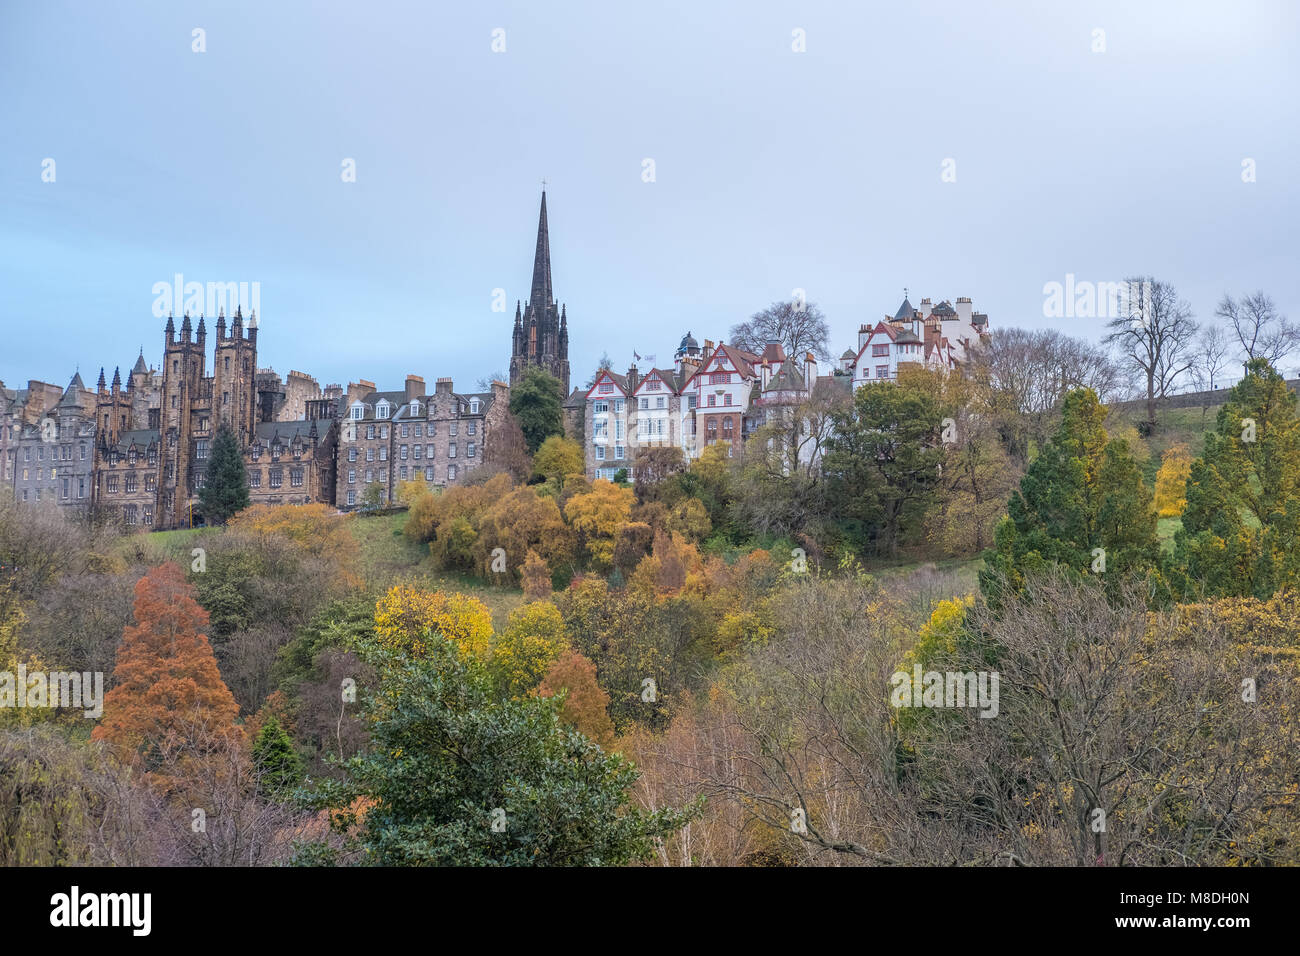 Beautiful view of Ramsay Gardens and building on Royal Miles in Edinburgh, United Kingdom Stock Photo